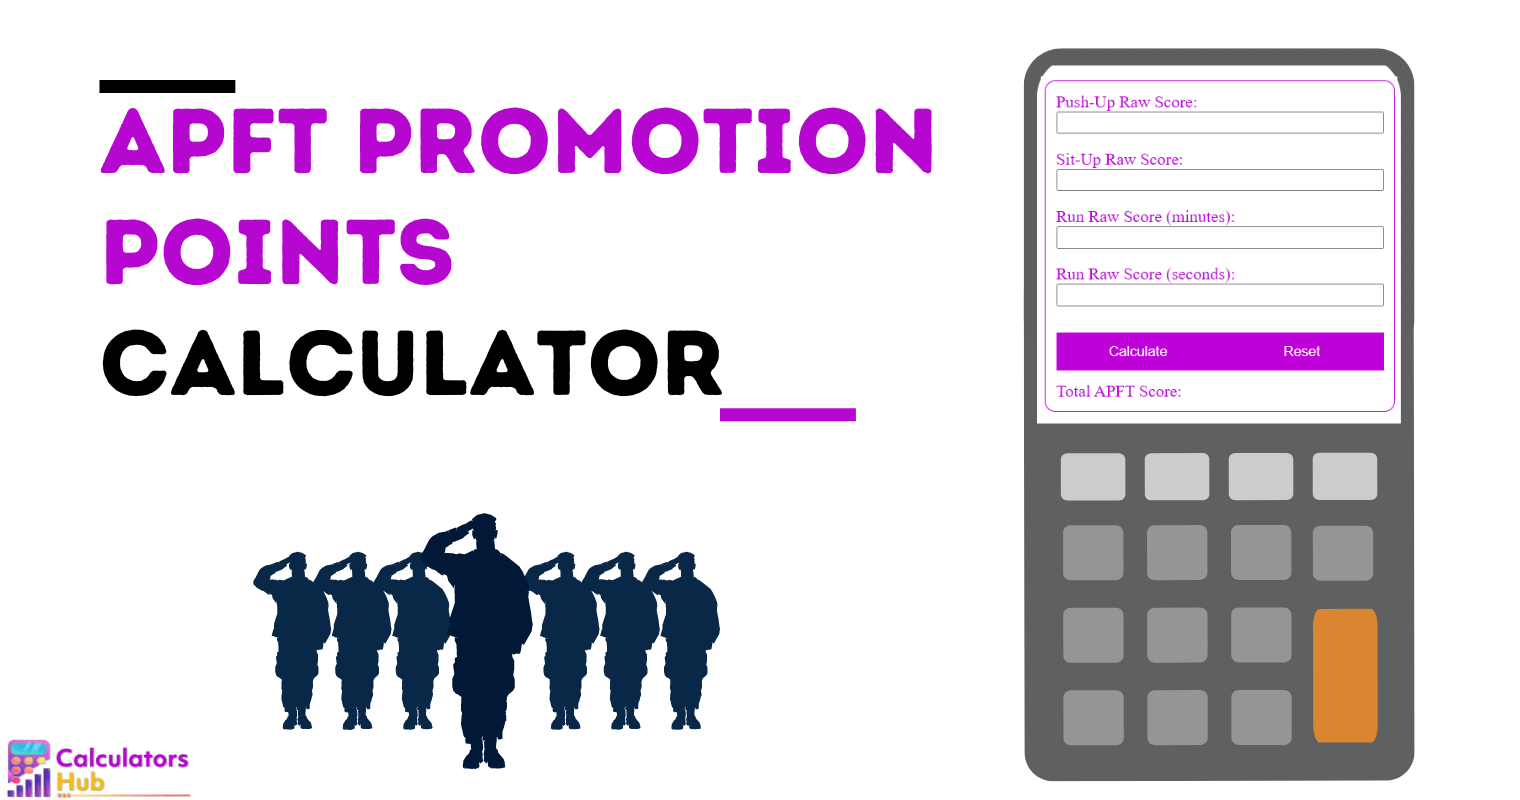 APFT Promotion Points Calculator